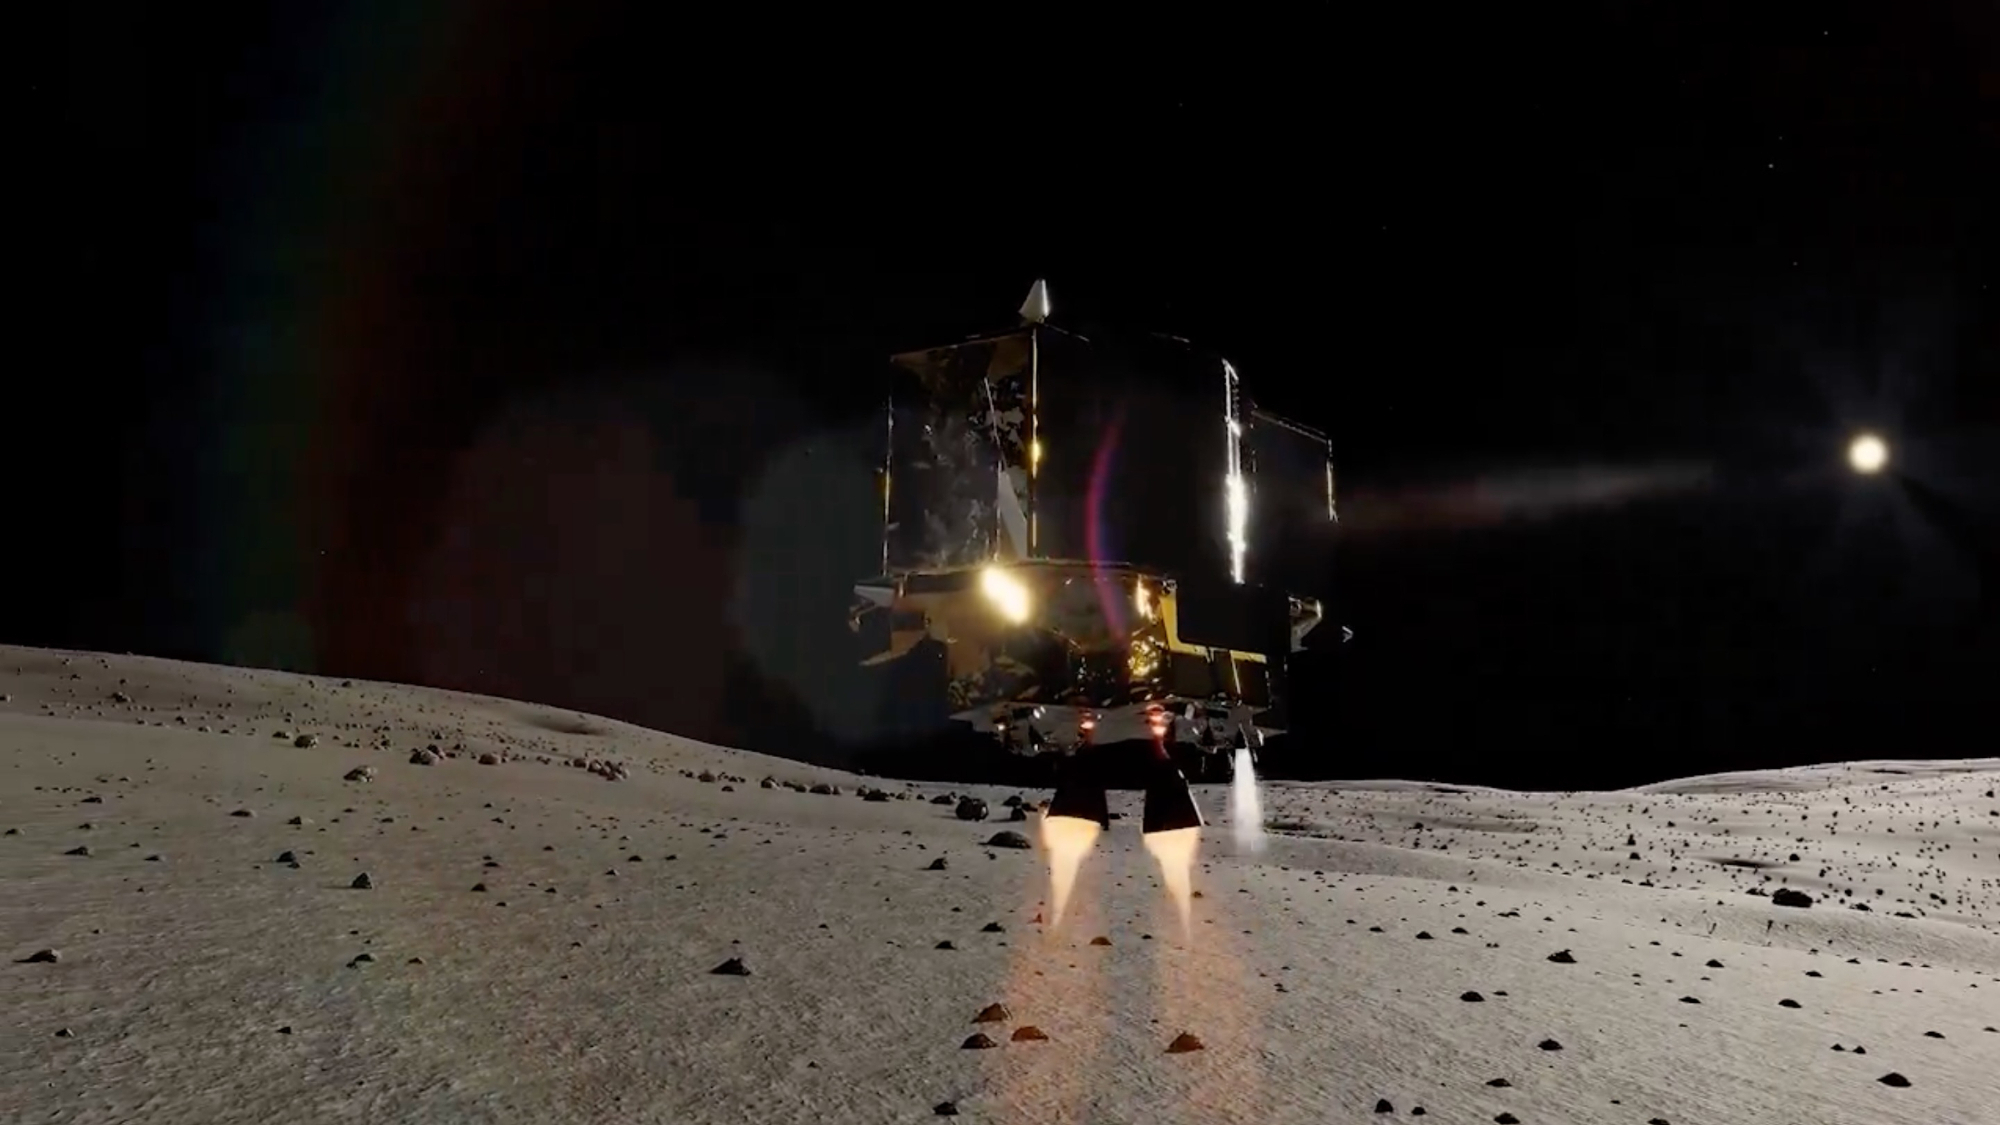 Not dead yet: Japan prepares for possible recovery of SLIM moon lander